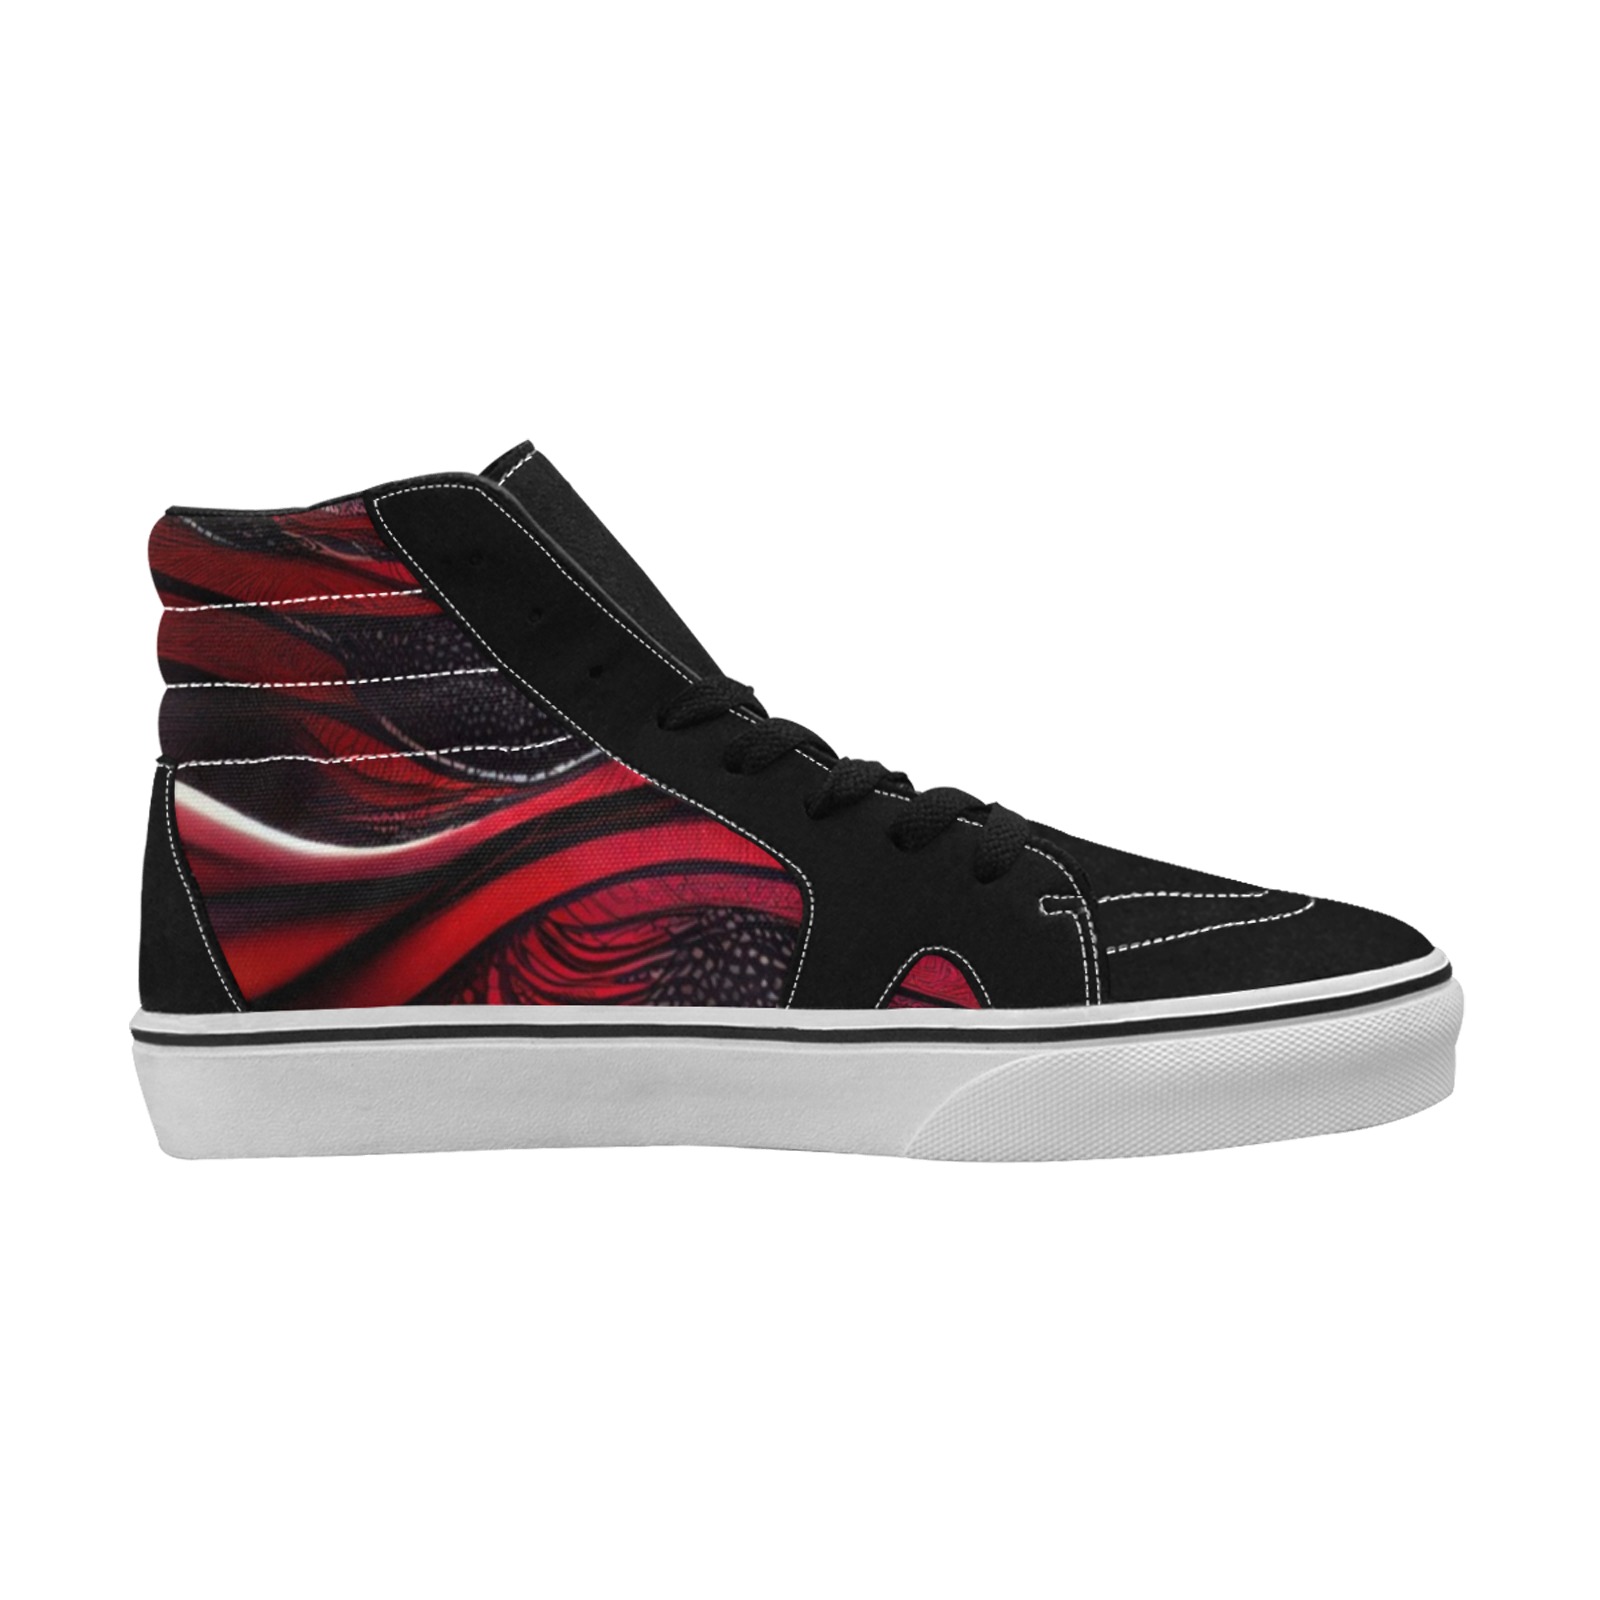 red and black wave's #3 Men's High Top Skateboarding Shoes (Model E001-1)